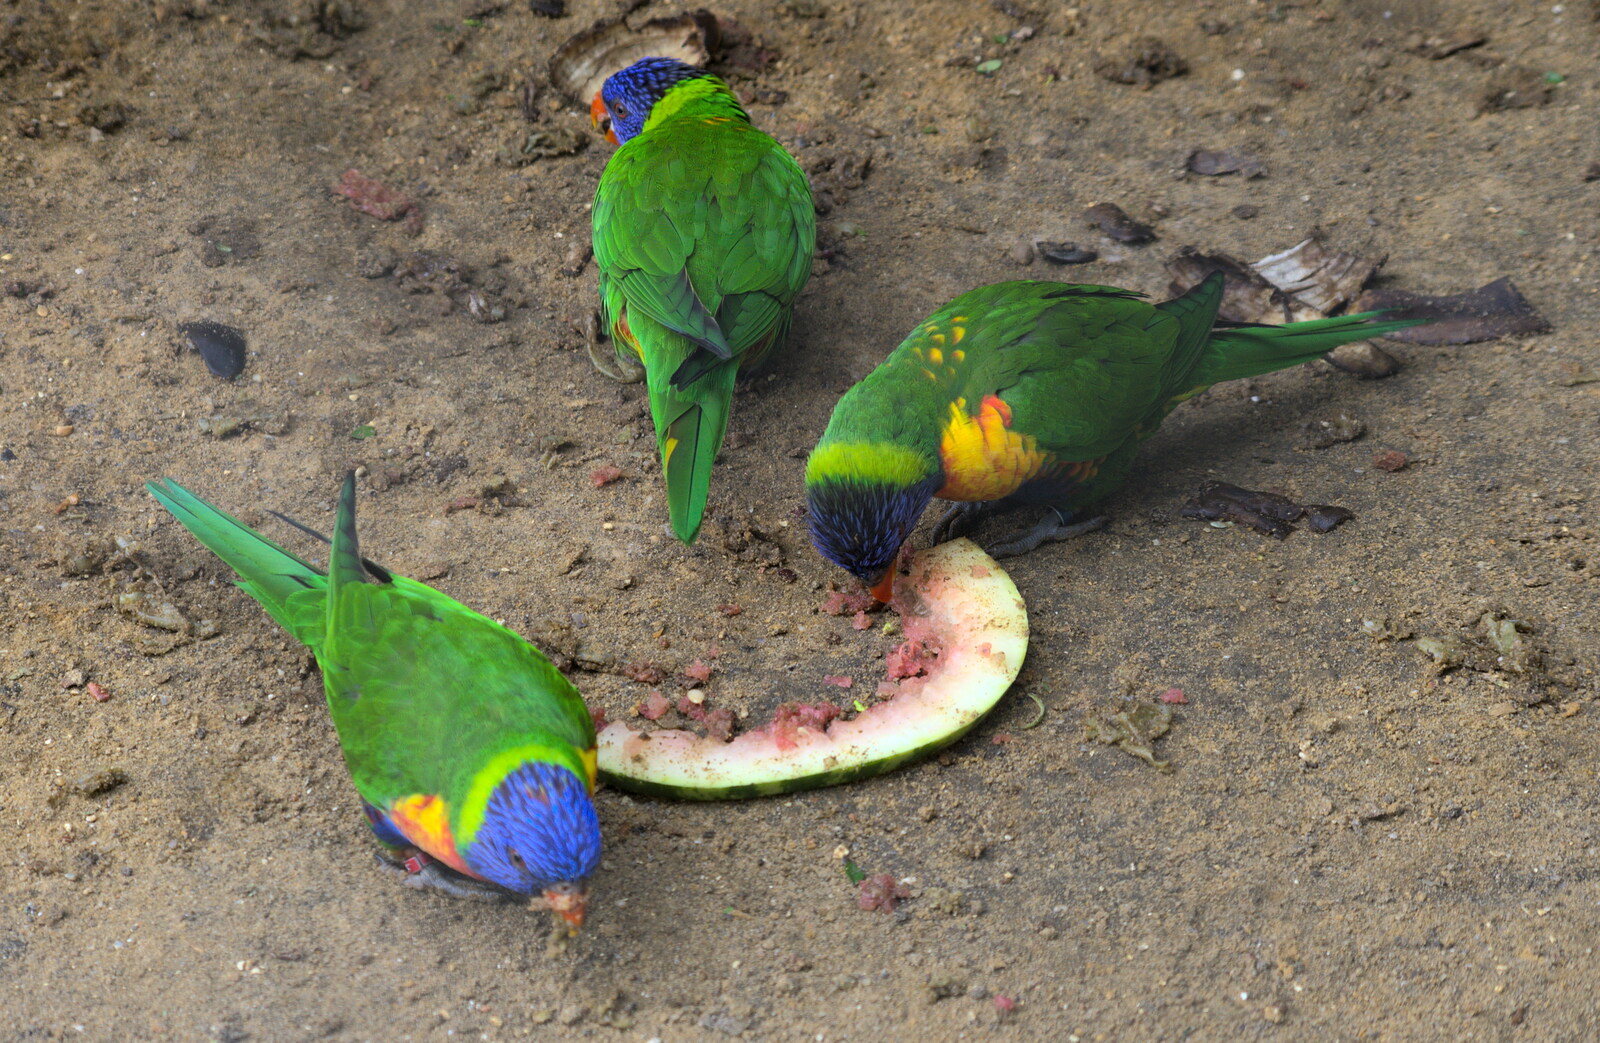 A Birthday Trip to the Zoo, Banham, Norfolk - 26th May 2014: The parrots eat melon